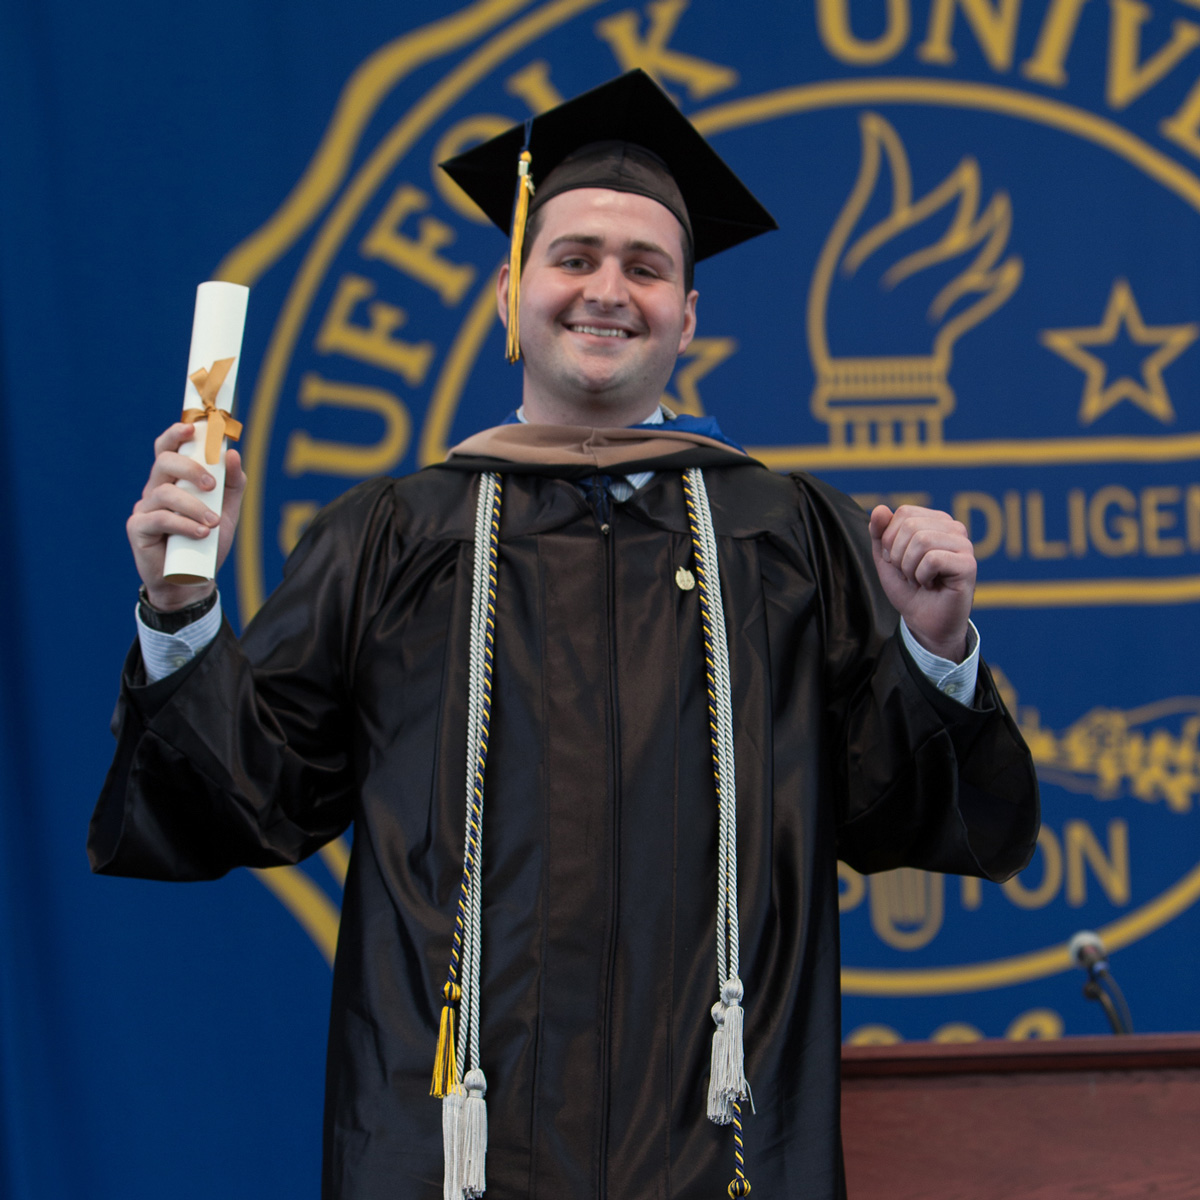 Vincent LePore holding up his scroll wearing his cap and gown crossing the stage at Commencement.